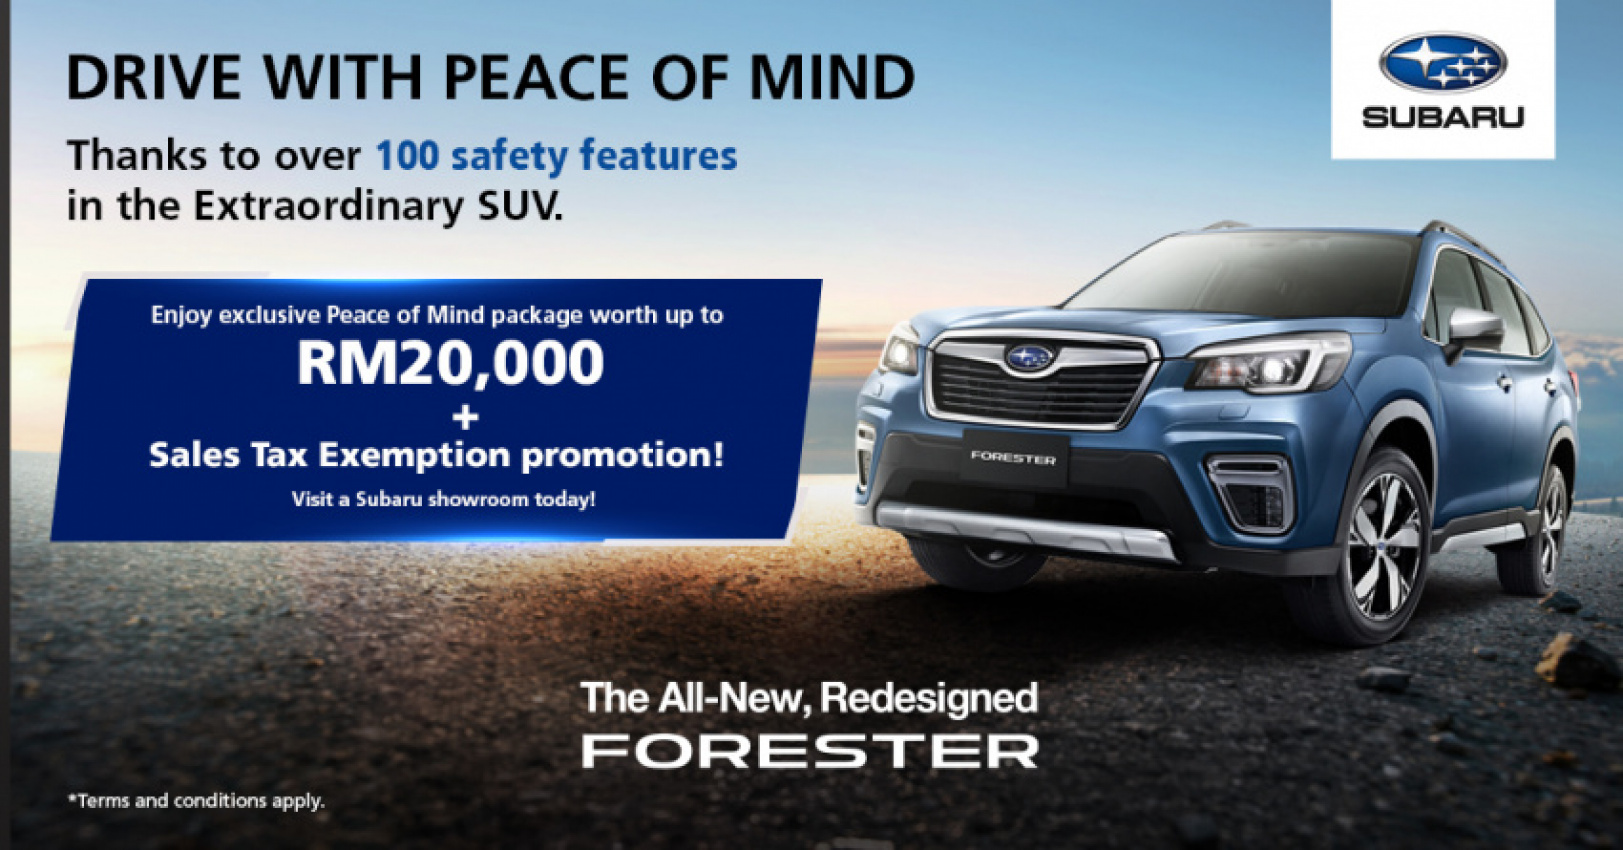 autos, car brands, cars, subaru, aftersales, automotive, cars, crossover, malaysia, promotions, service centre, showroom, subaru malaysia, tc subaru, subaru offers peace of mind for forester and xv